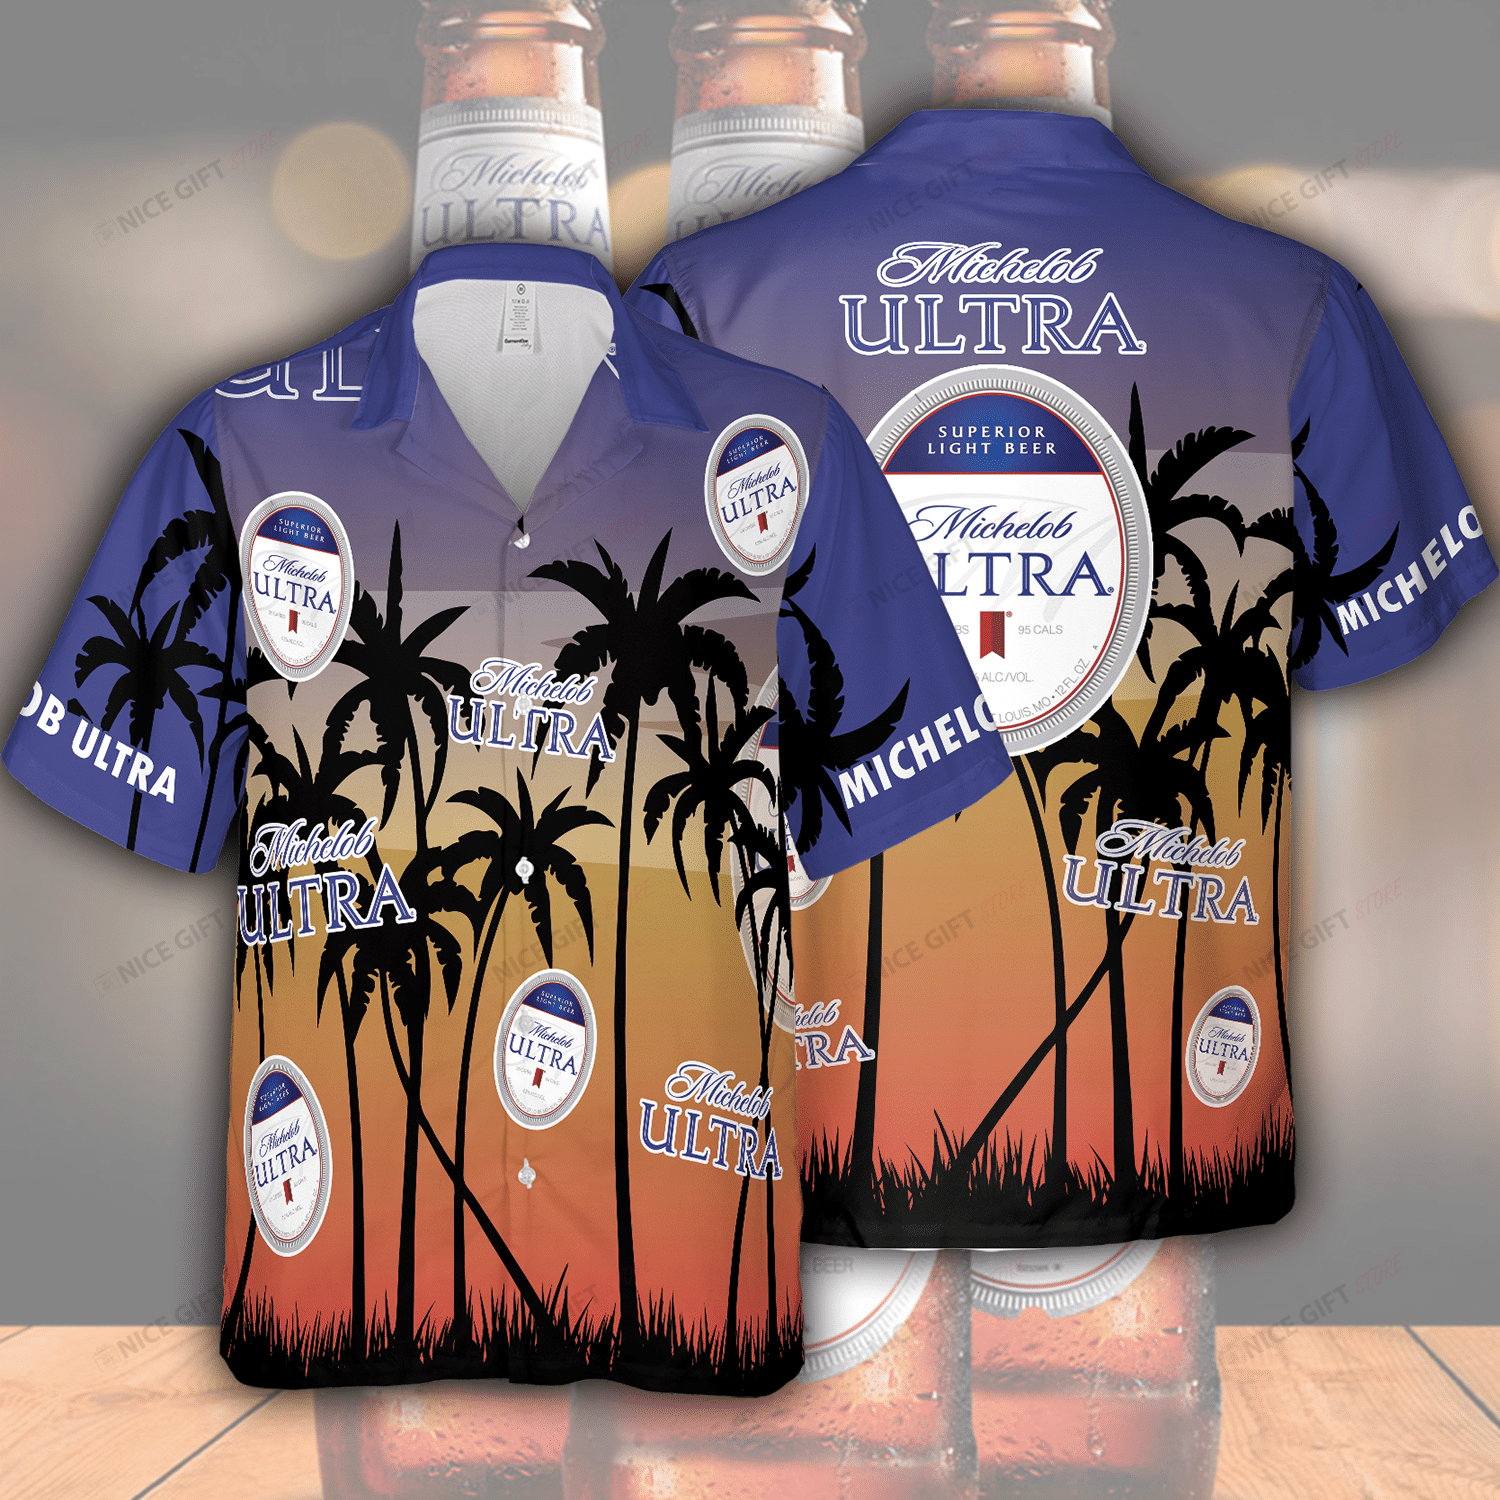 If you're a fan of a Hawaiian Shirt, you can choose one at our store 78